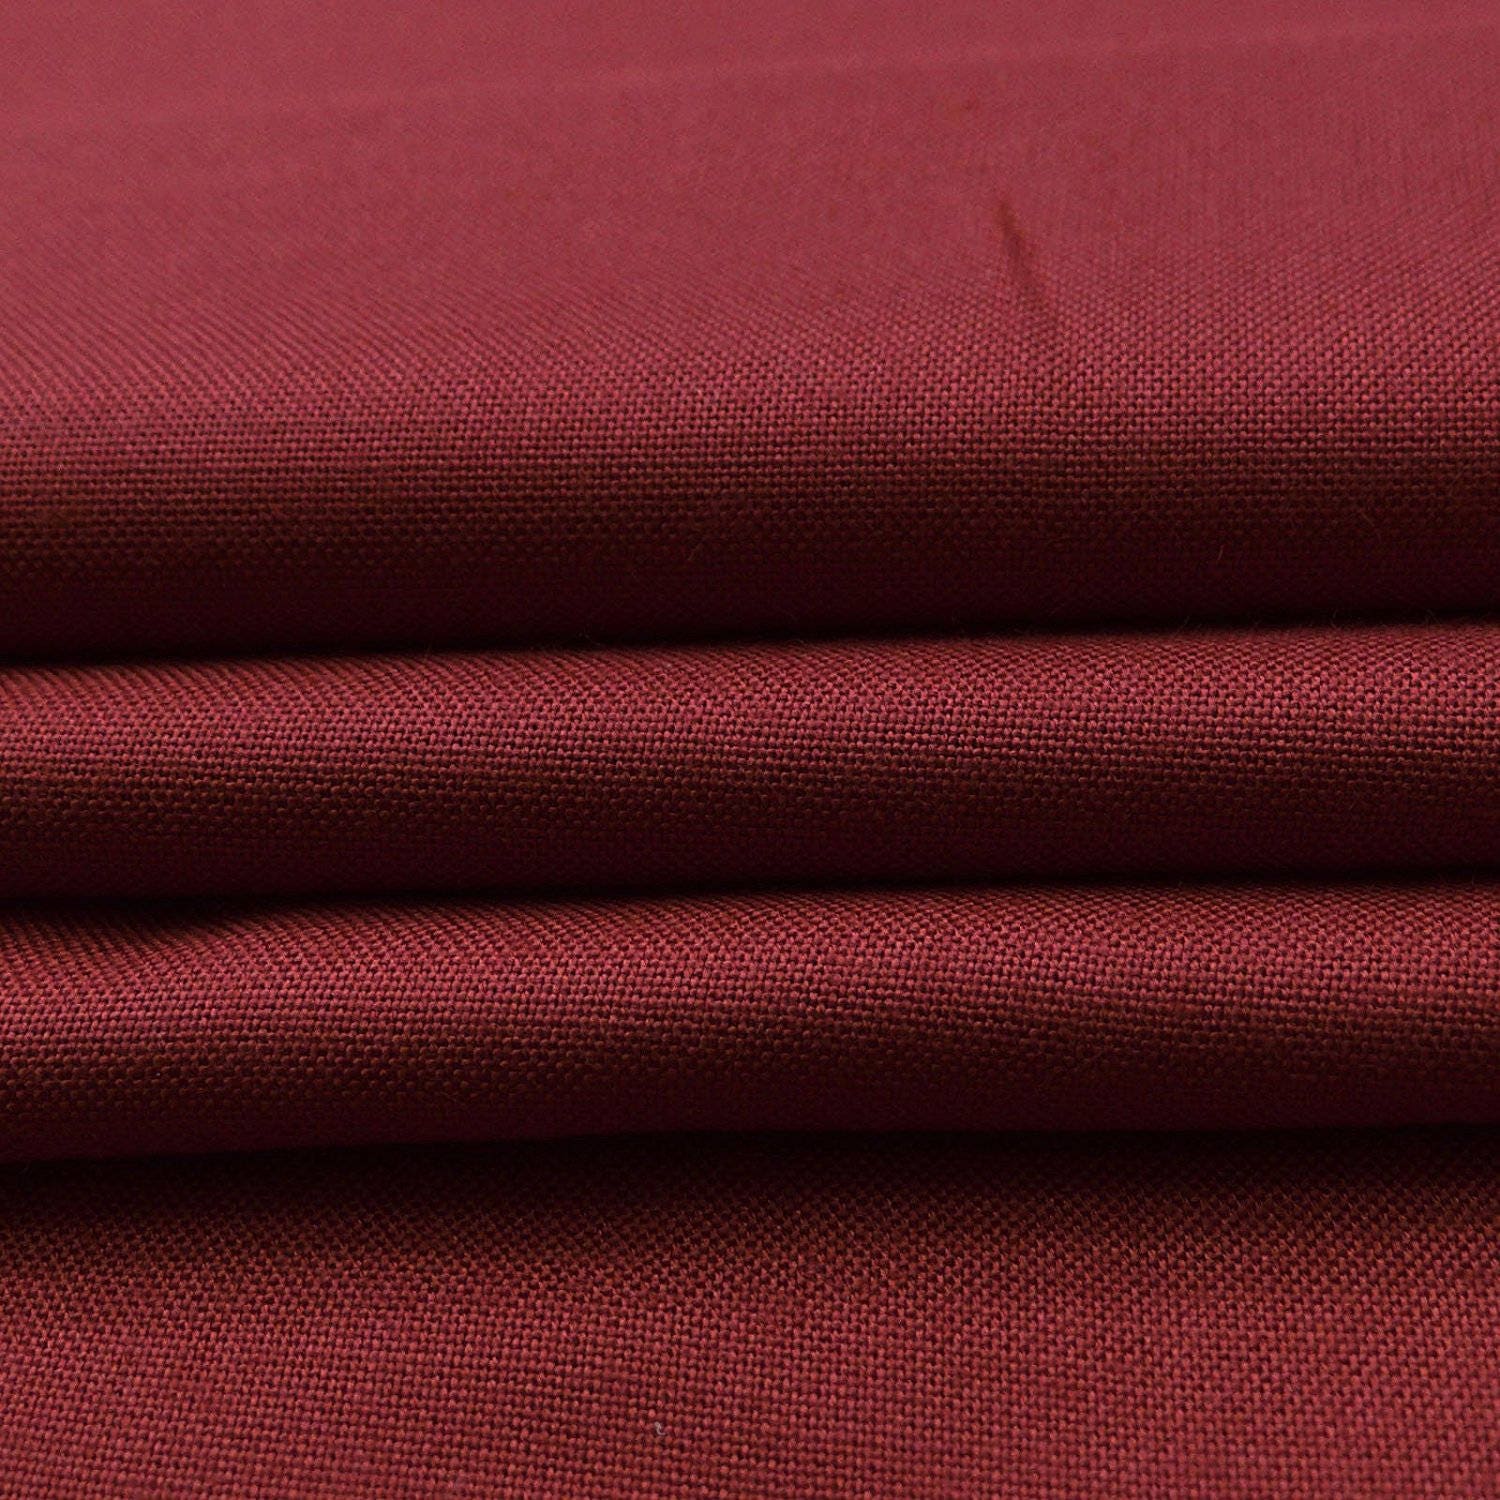 Maroon Fabric Rayon Fabric Dress Material Home Accessories - Etsy